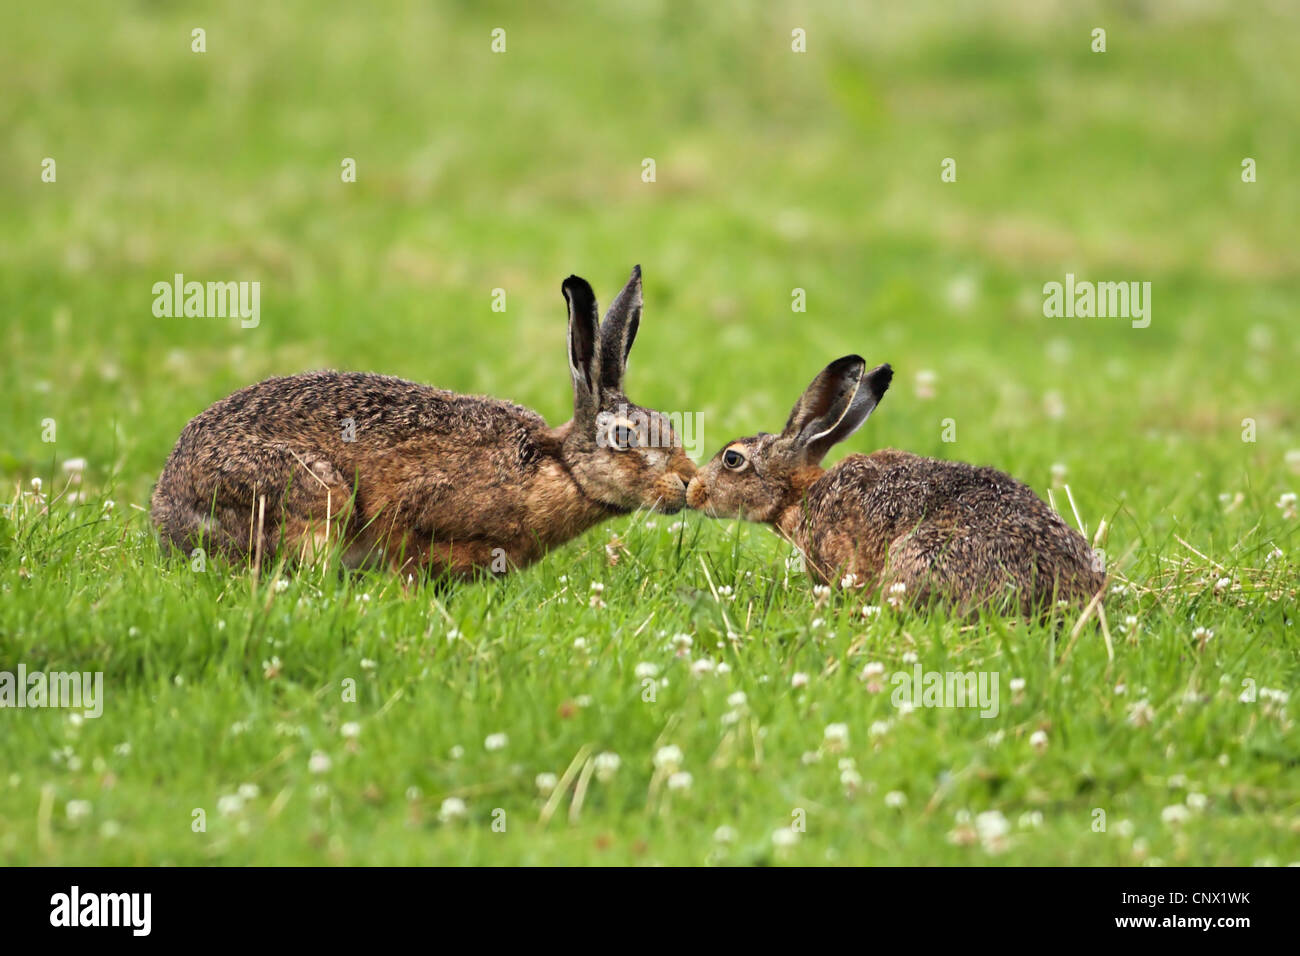 European hare (Lepus europaeus), two hares in a meadow sniffing at each other, Germany Stock Photo